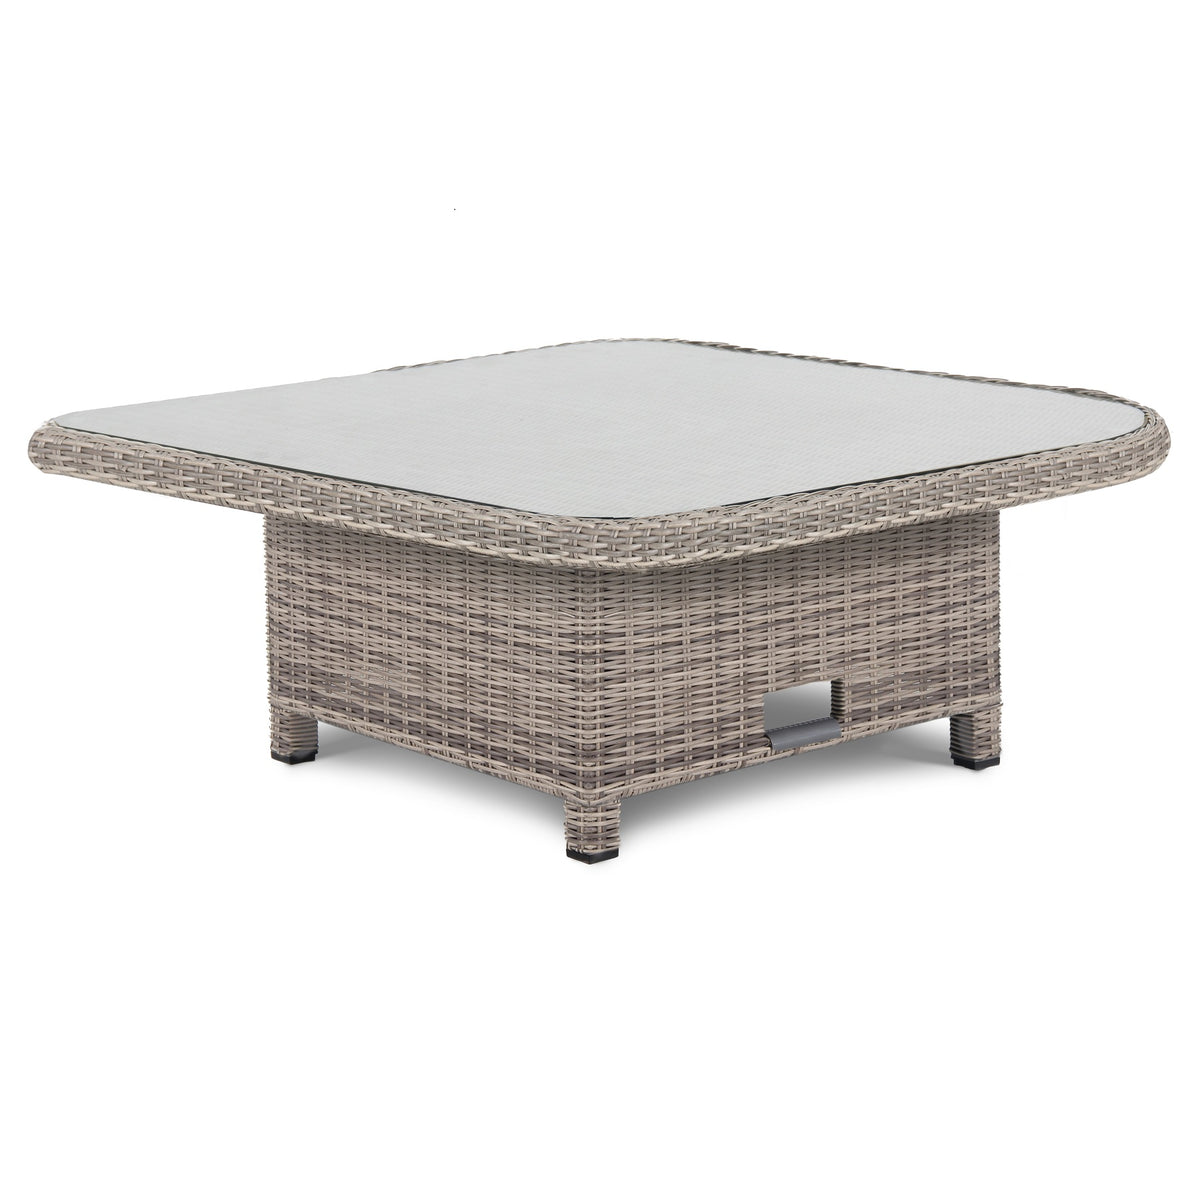 Kettler Palma Signature Grande Oyster Wicker High Low Adjustable Glass Top Table